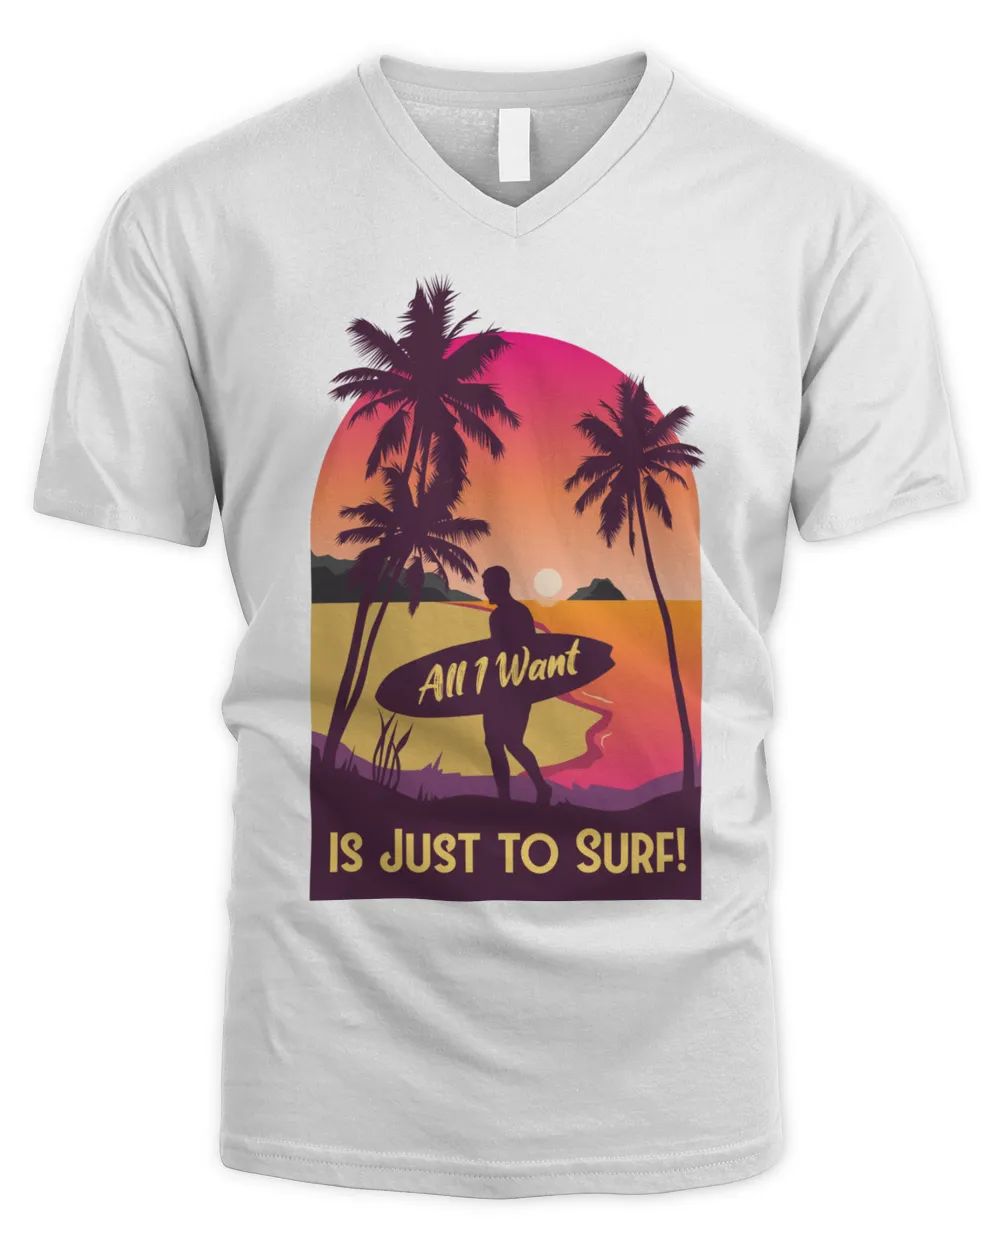 All I Want is Just to Surf (Sale)